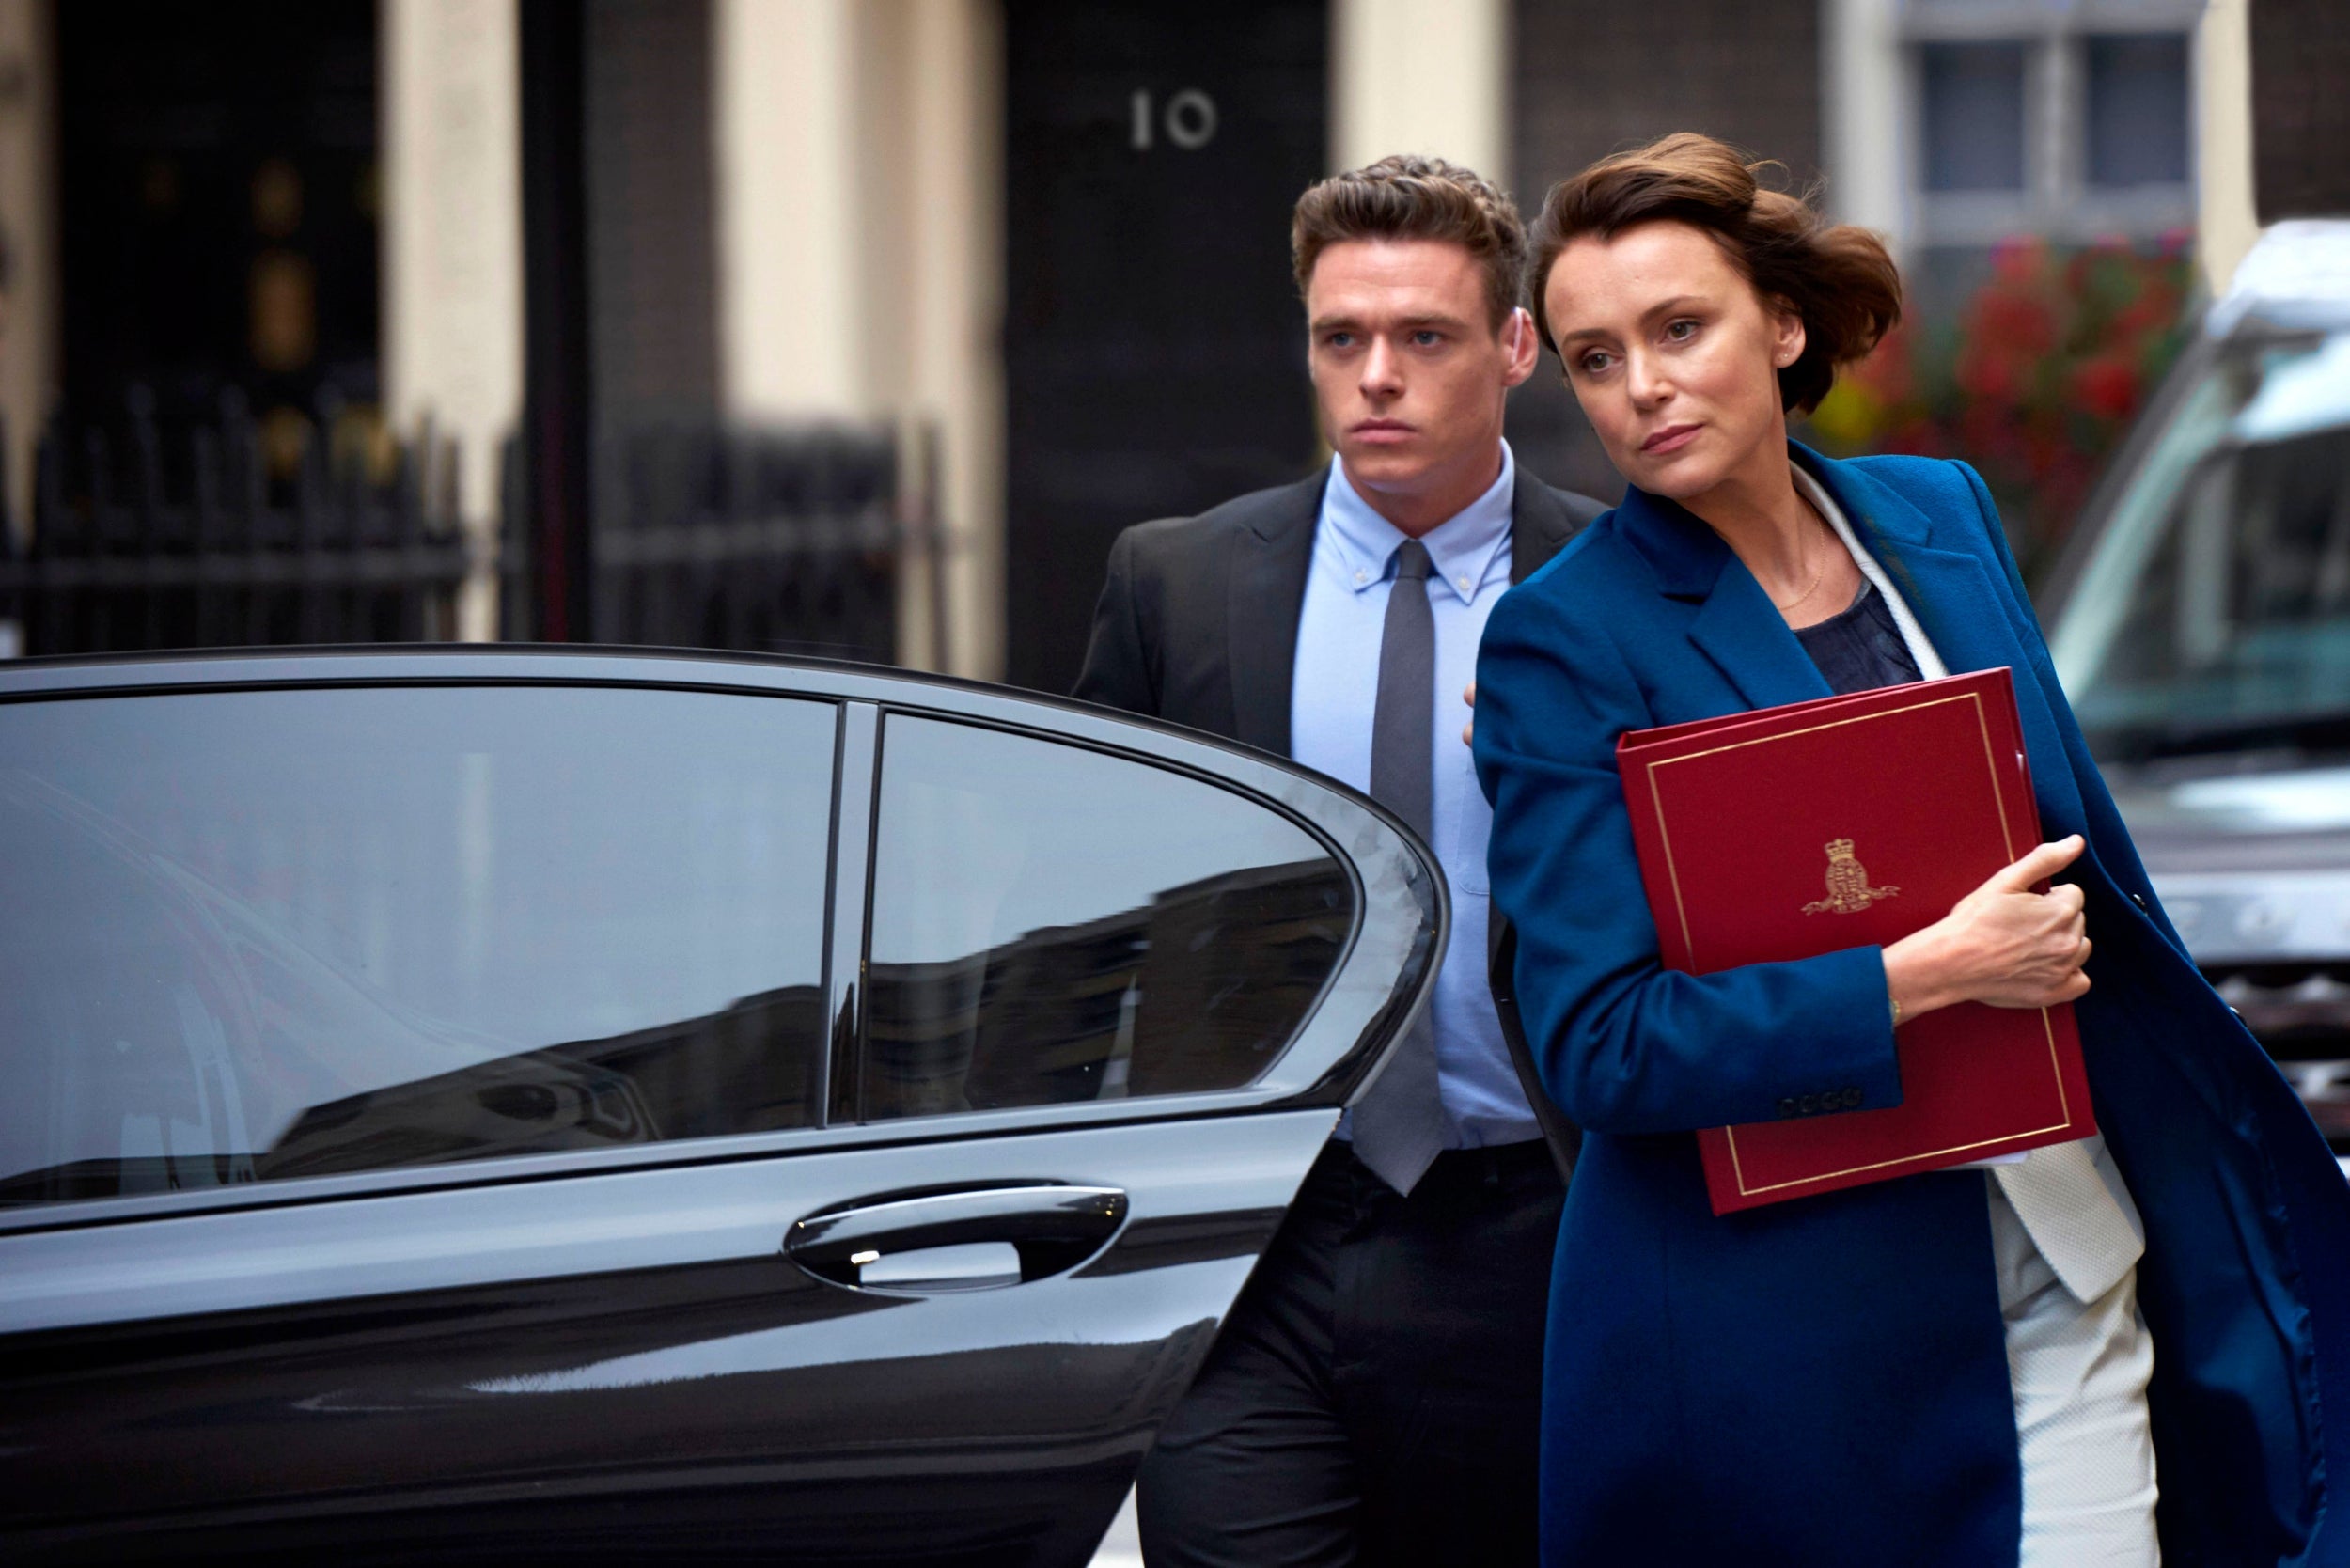 David Madden and Keeley Hawes starred in the year-defining drama ‘Bodyguard’ (PA)